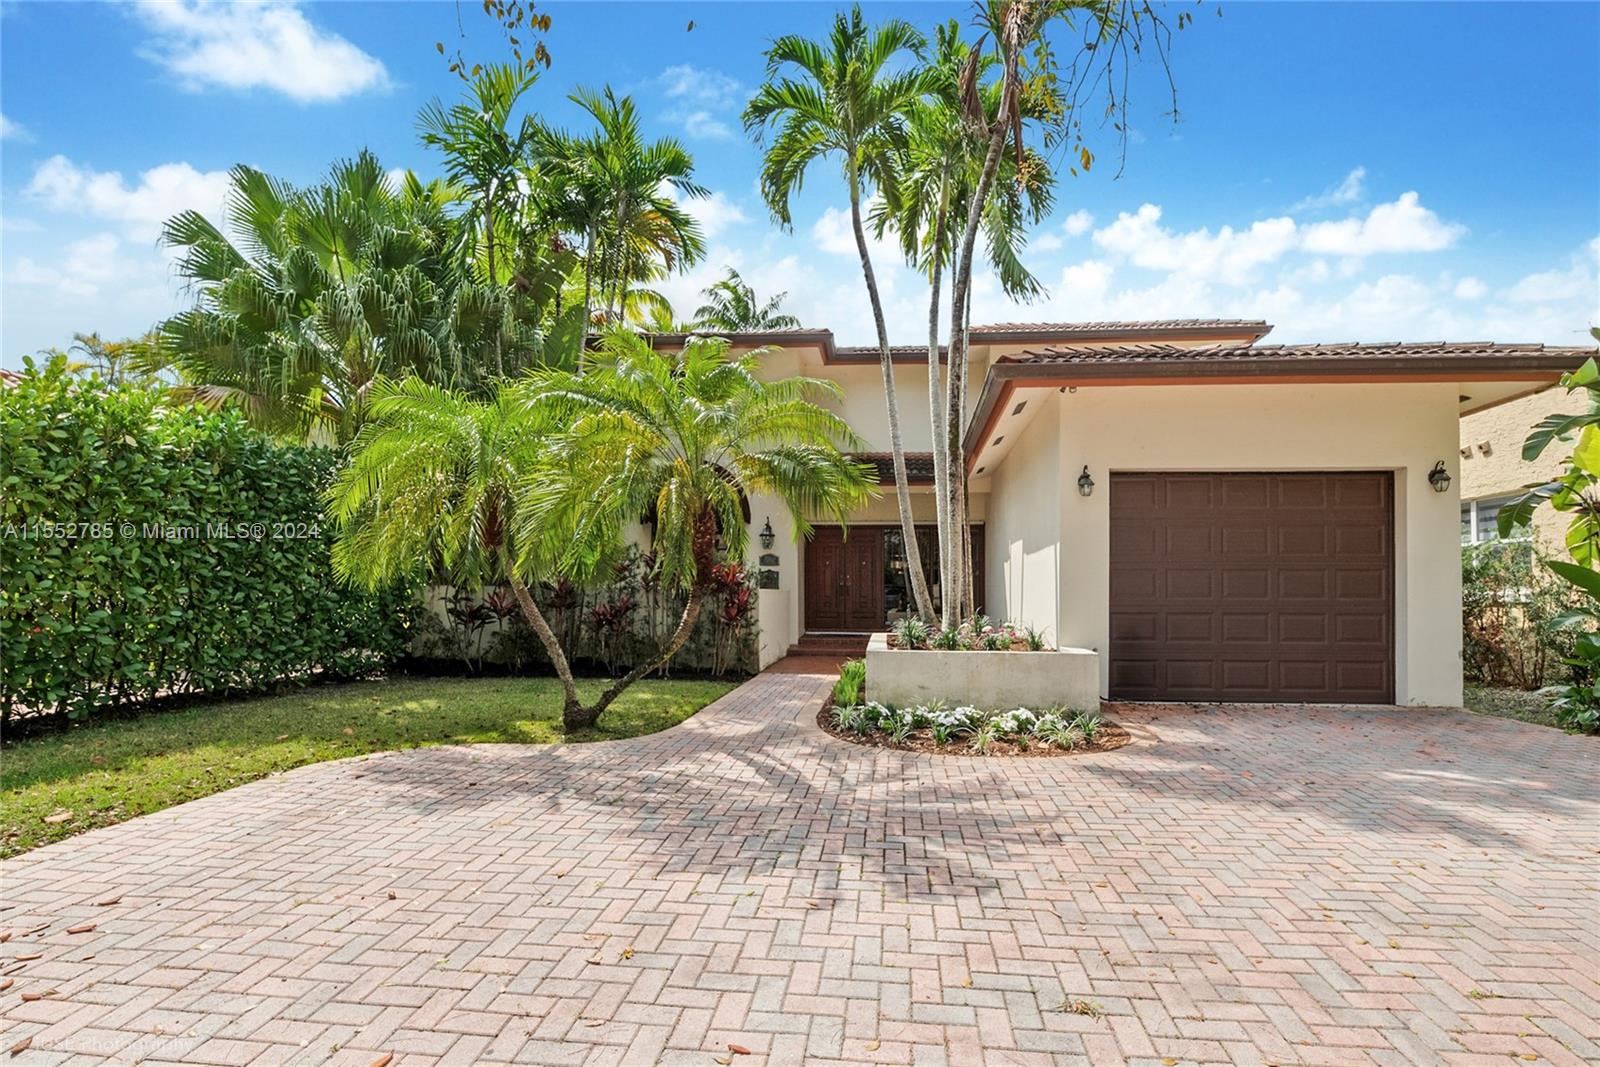 Property for Sale at 516 Majorca Ave, Coral Gables, Broward County, Florida - Bedrooms: 3 
Bathrooms: 3  - $1,600,000